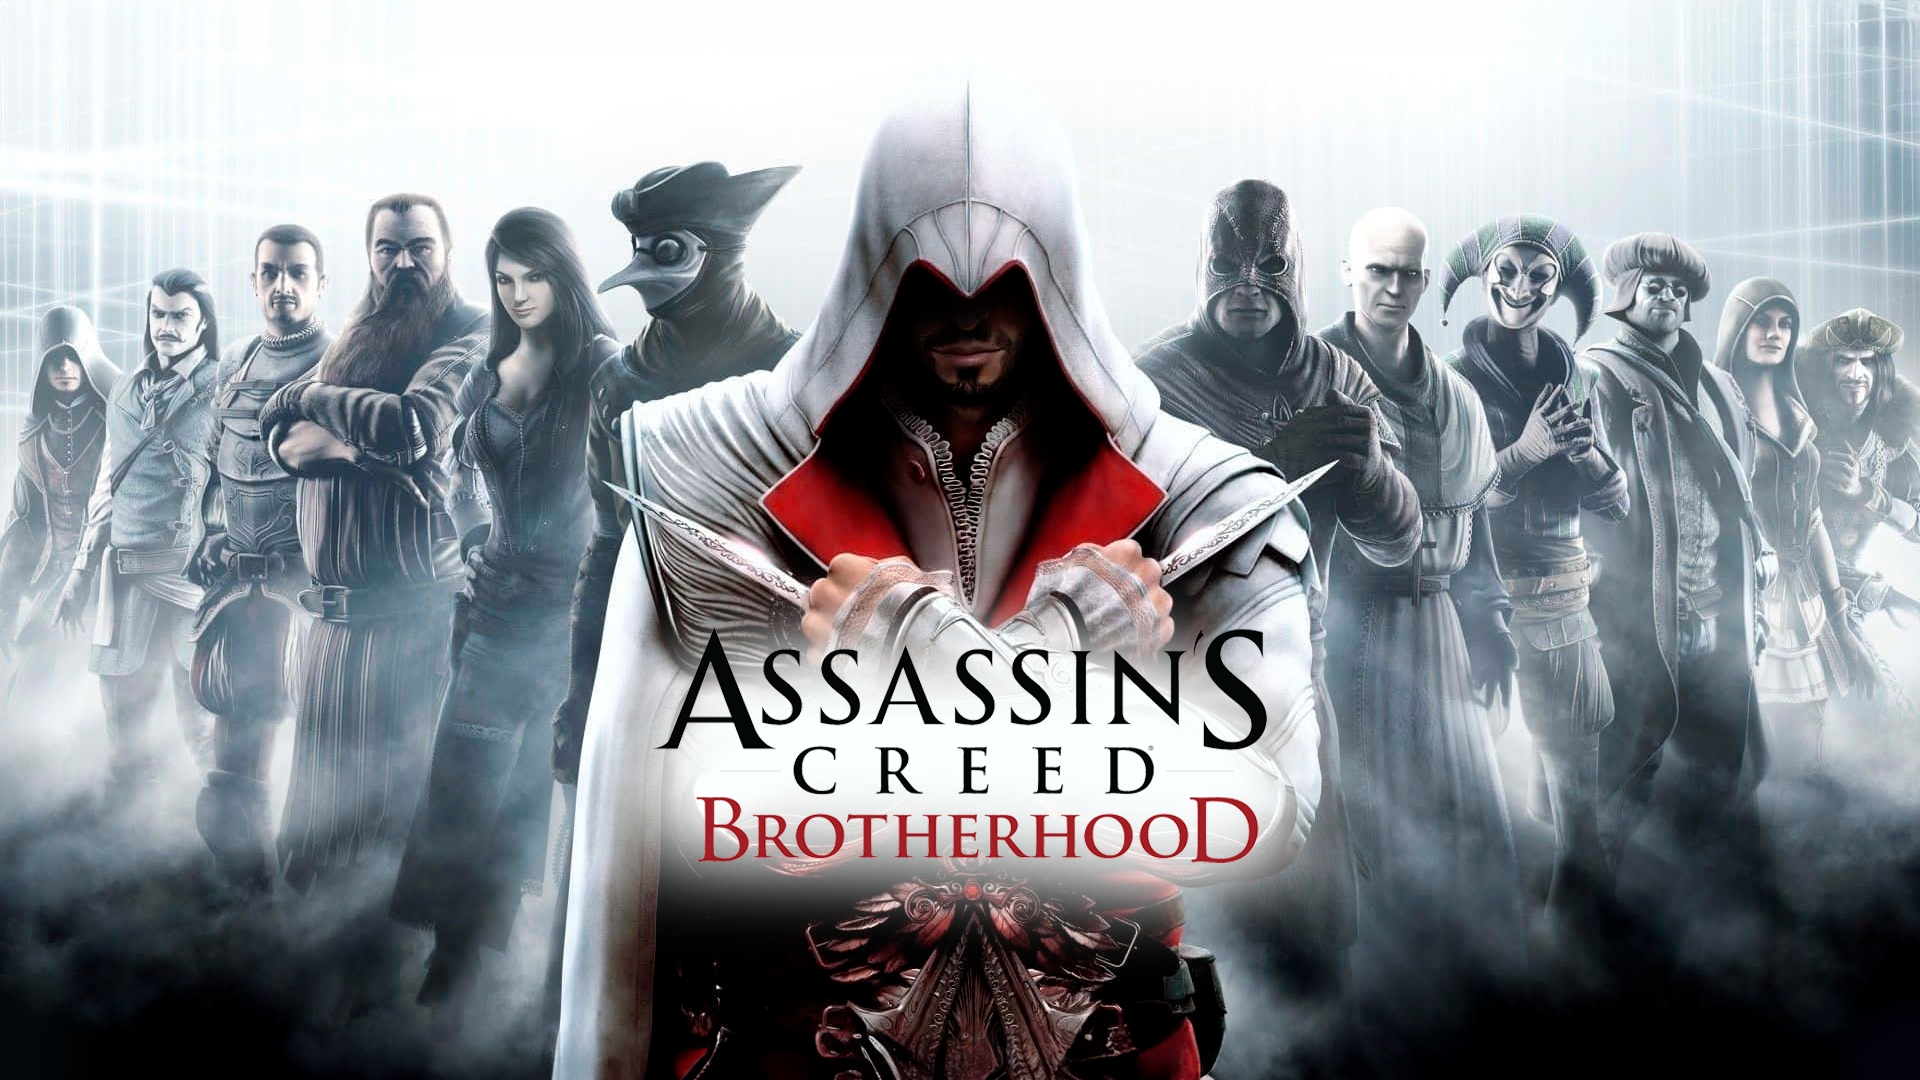 Buy Assassin's Creed II Deluxe Edition Steam Gift GLOBAL - Cheap - !